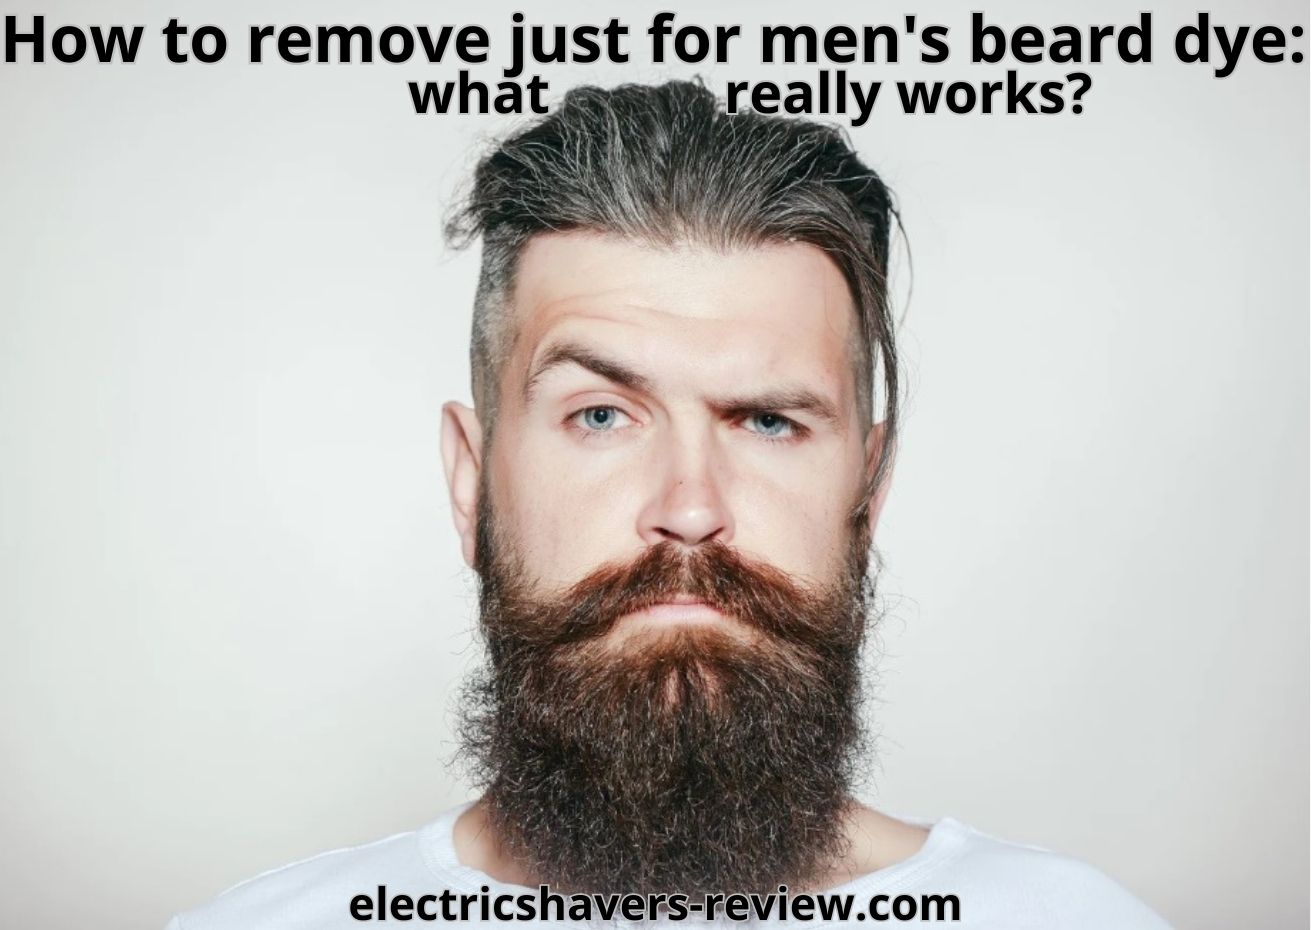 How to remove just for men's beard dye: 3 best solutions